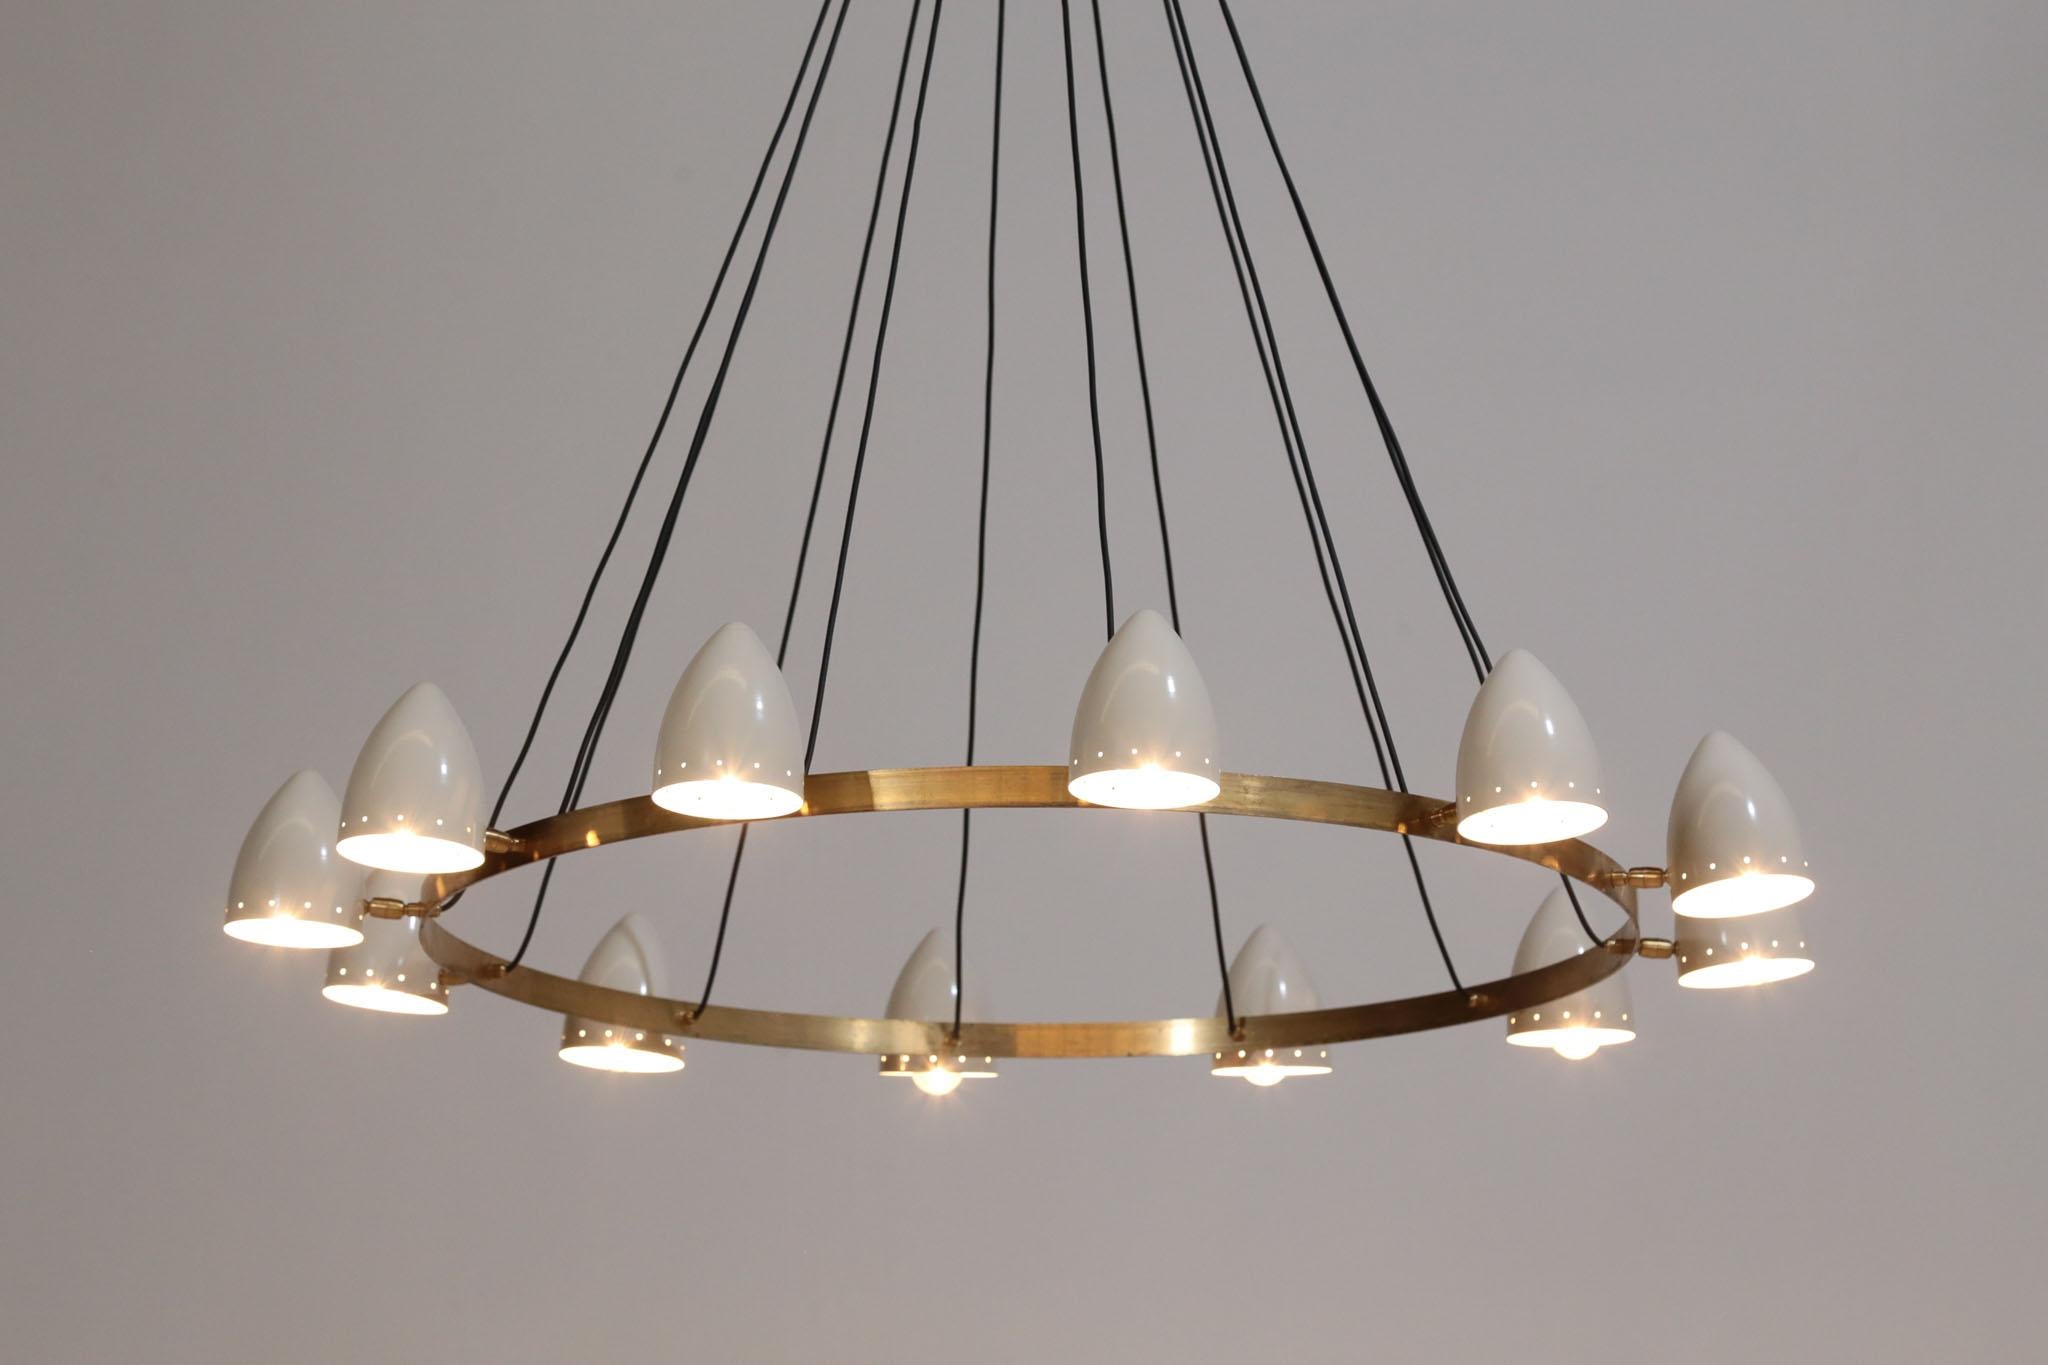 Large Modern Chandelier, Italian Stilnovo Style In Excellent Condition For Sale In Lyon, FR